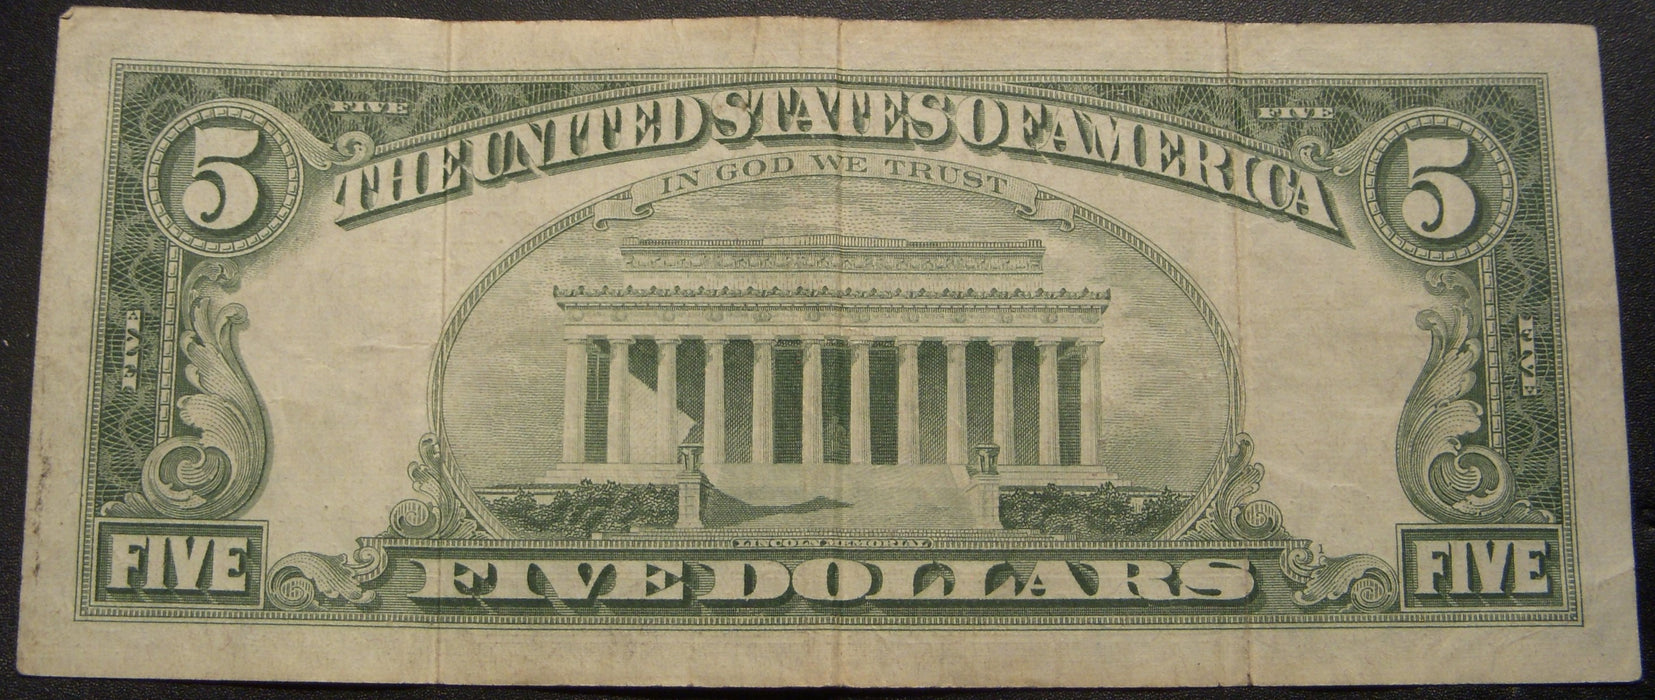 1963 $5 United States Note - Star Note FR# 1536*